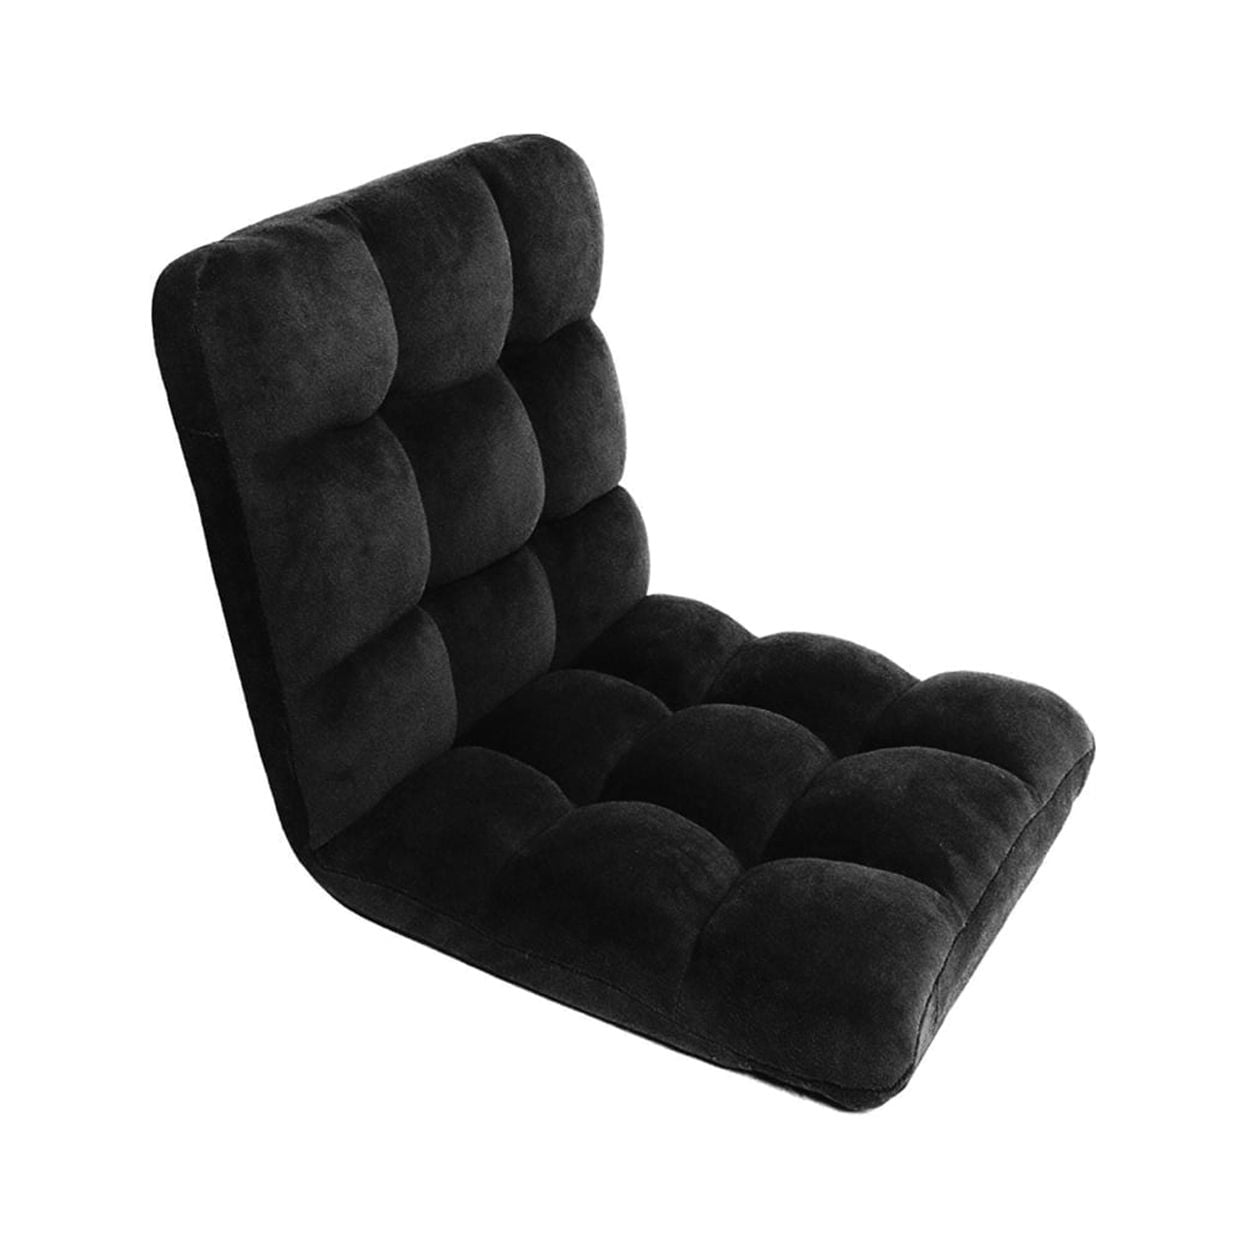 Frc2747-us Urban Microfiber Modern Contemporary Armless Quilted Recliner Chair Case - Black